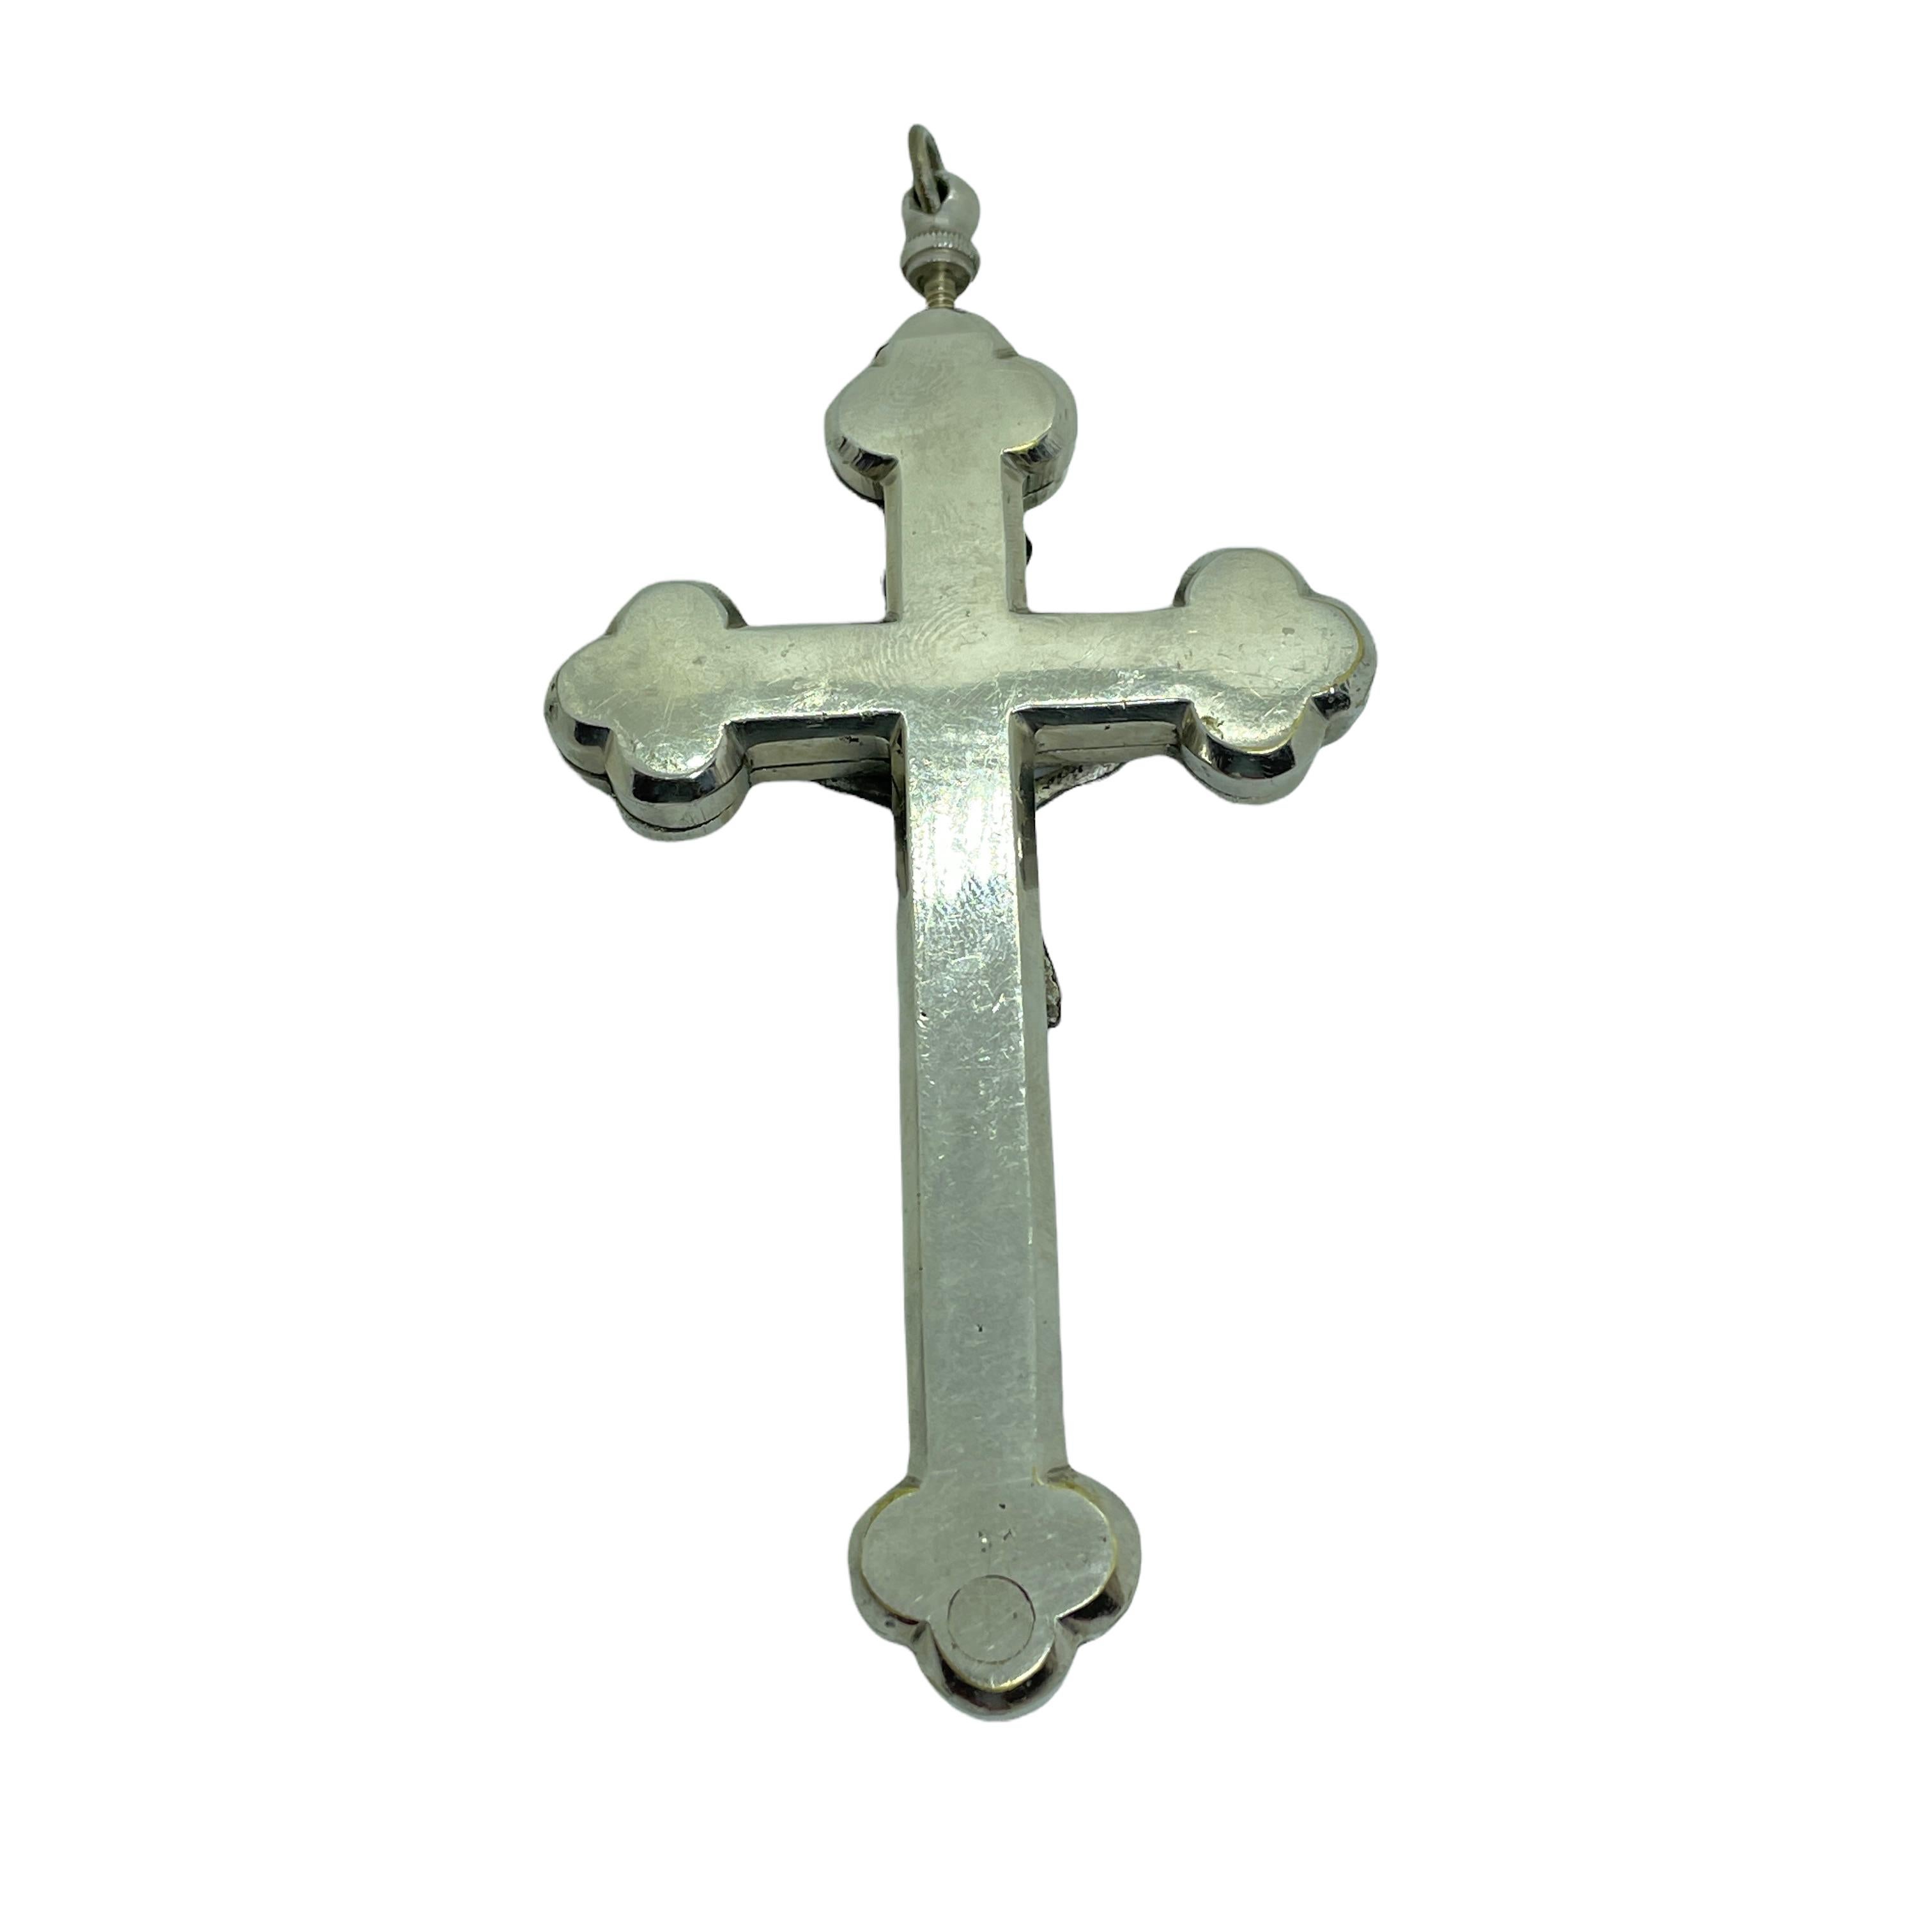 Early 20th Century Antique Catholic Reliquary Box Crucifix Pendant with 12 Relics of Saints